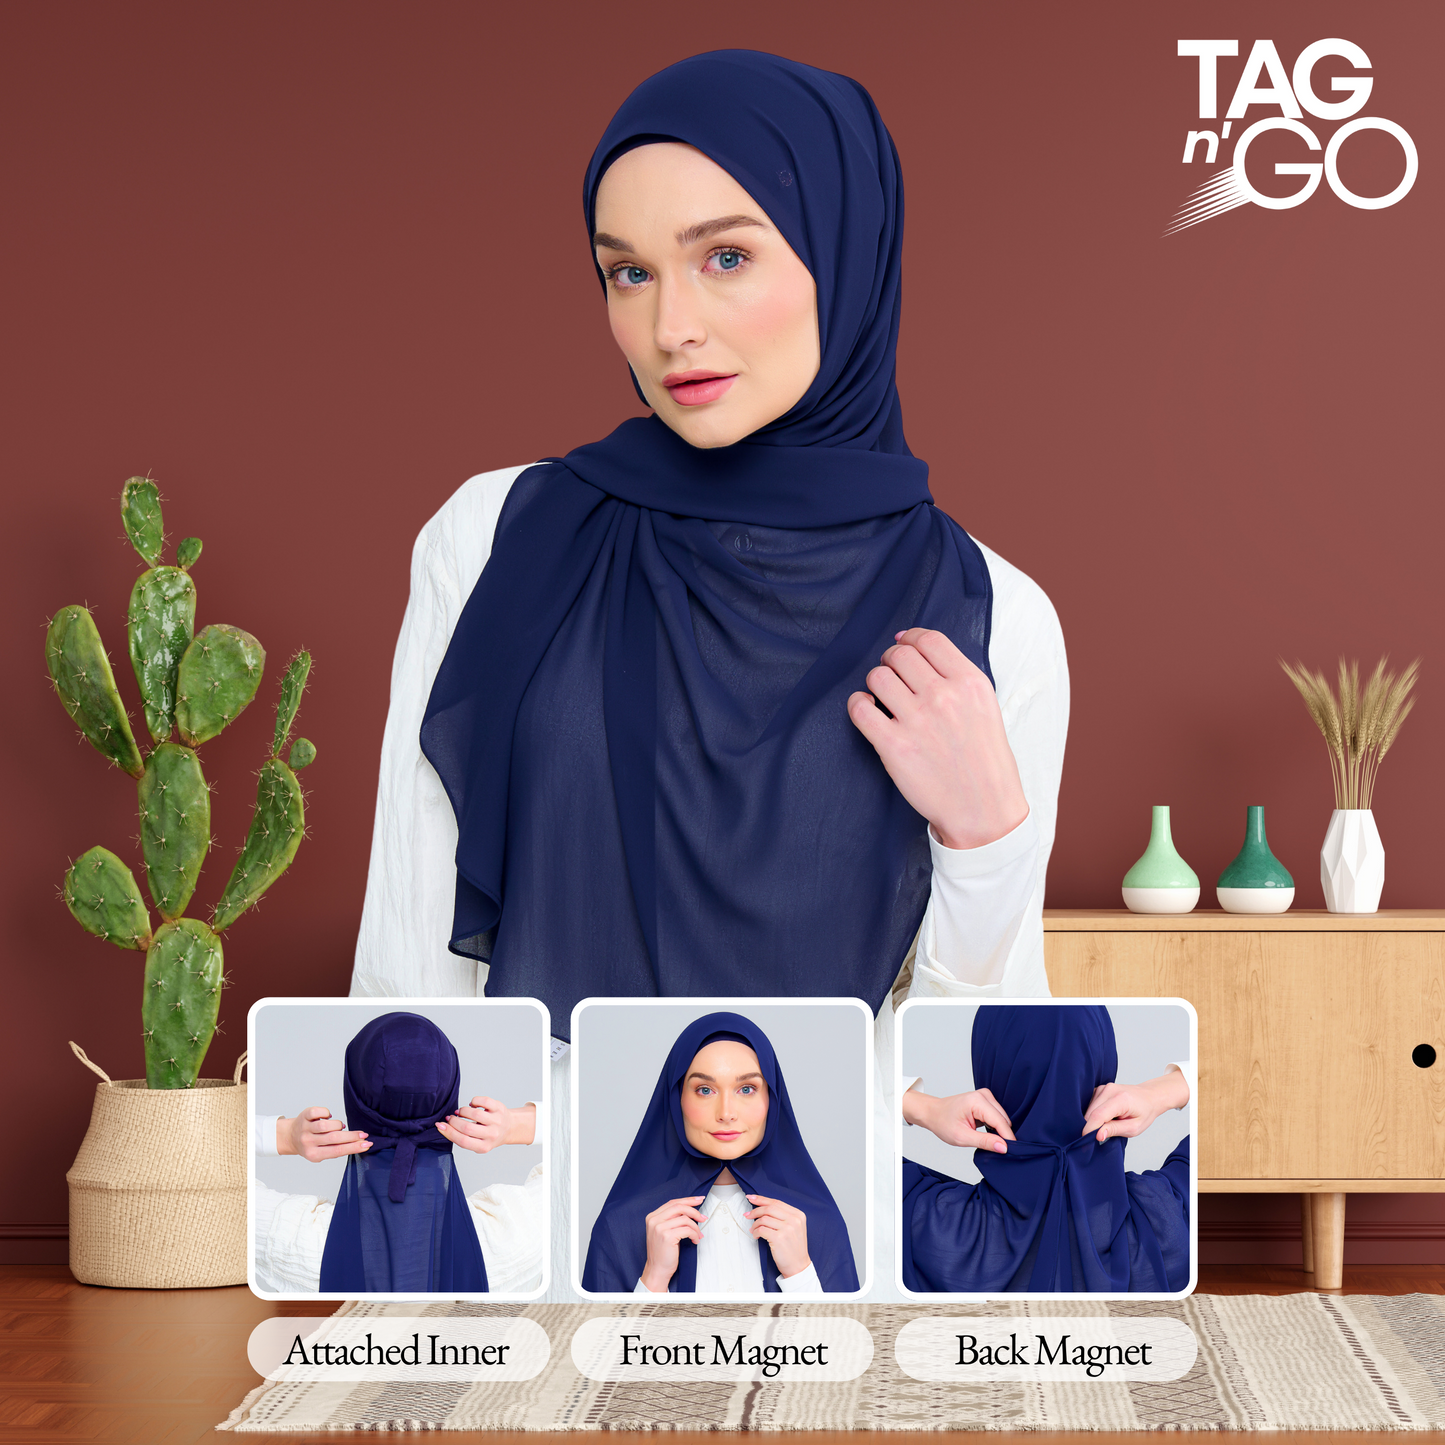 Instant Square Tag & Go l Cotton Voile in Navy Blue